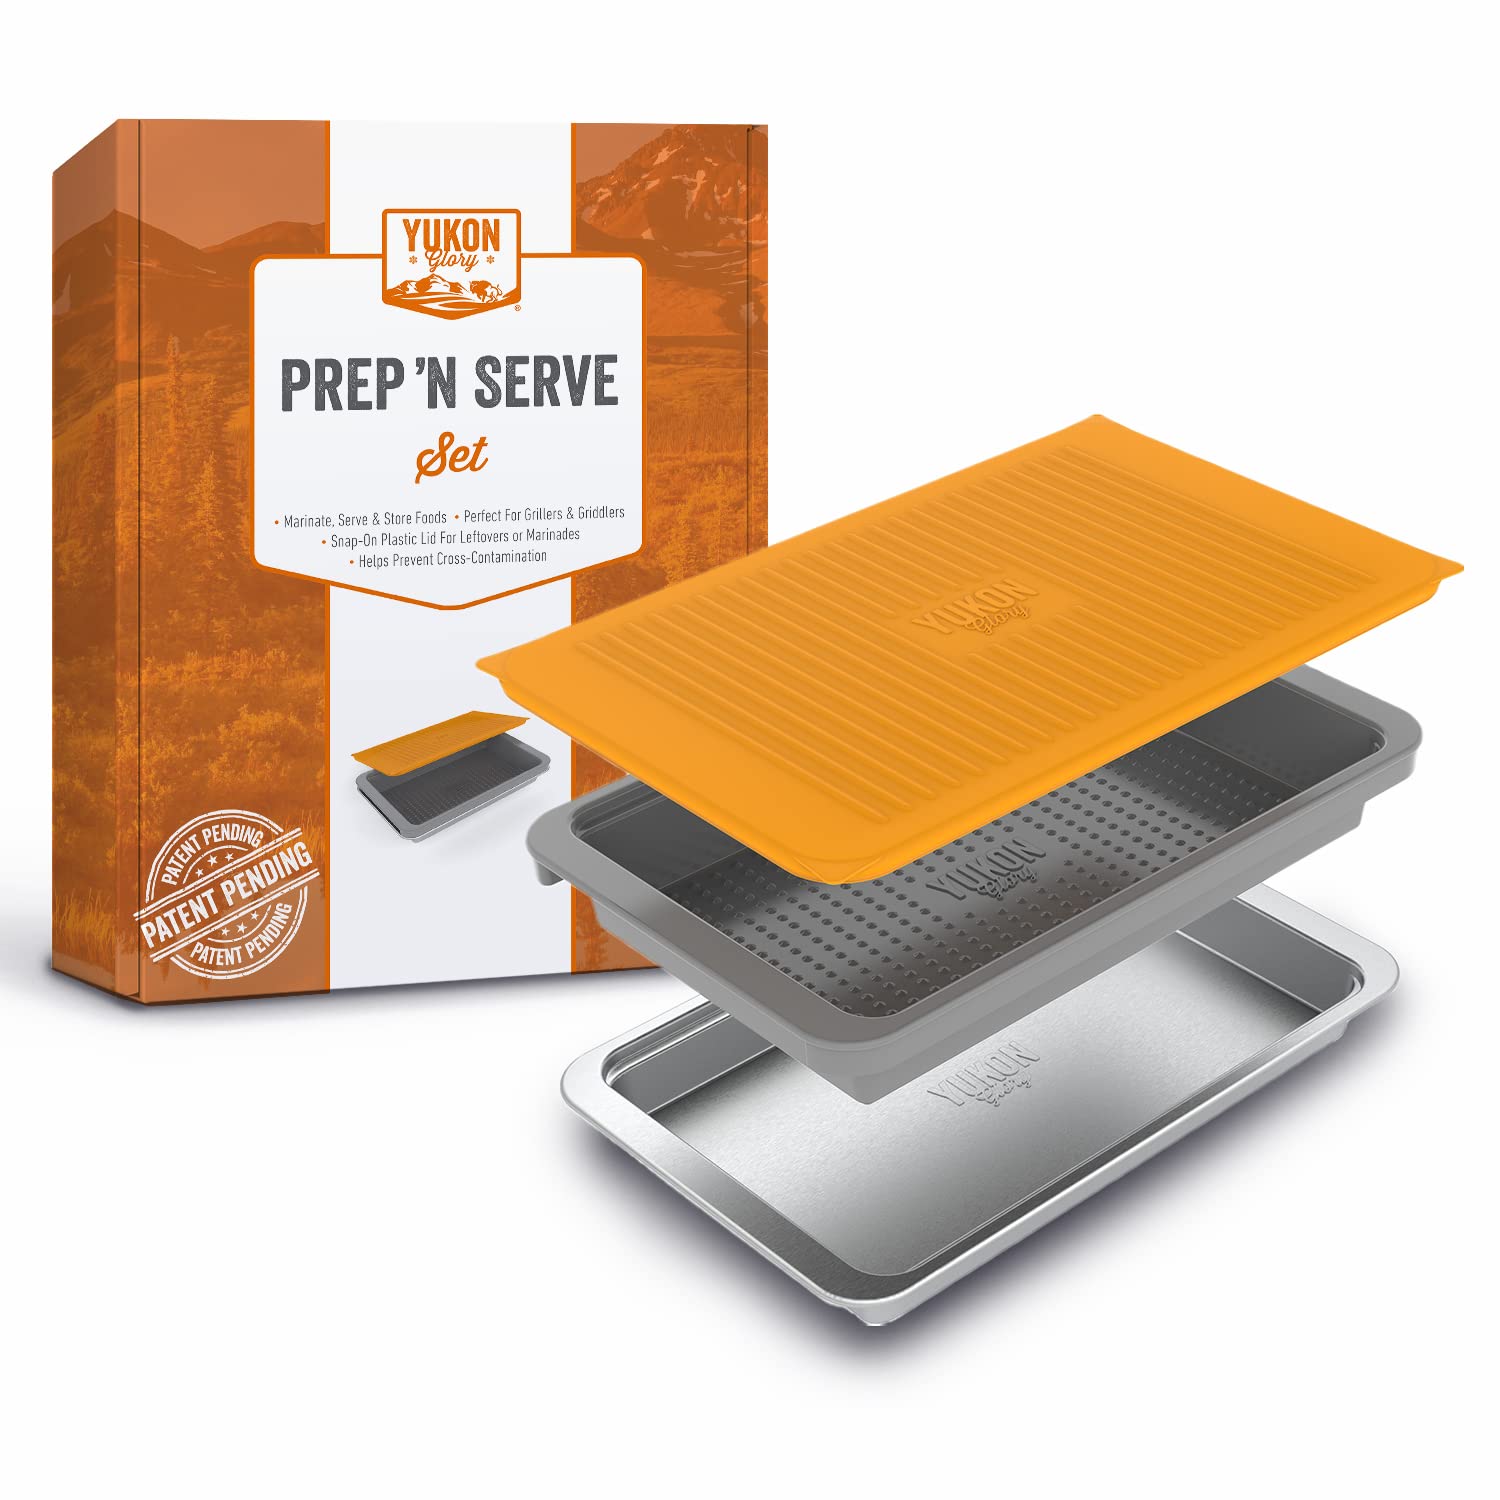 Food Prep BBQ Tray - The Yukon Glory™ Grill Prep Trays Include Plastic Marinade Container for Marinating Meat & Stainless Steel Serving Platter for All Your Grilled Barbecue - BBQ Prep 'N Serve™ Set